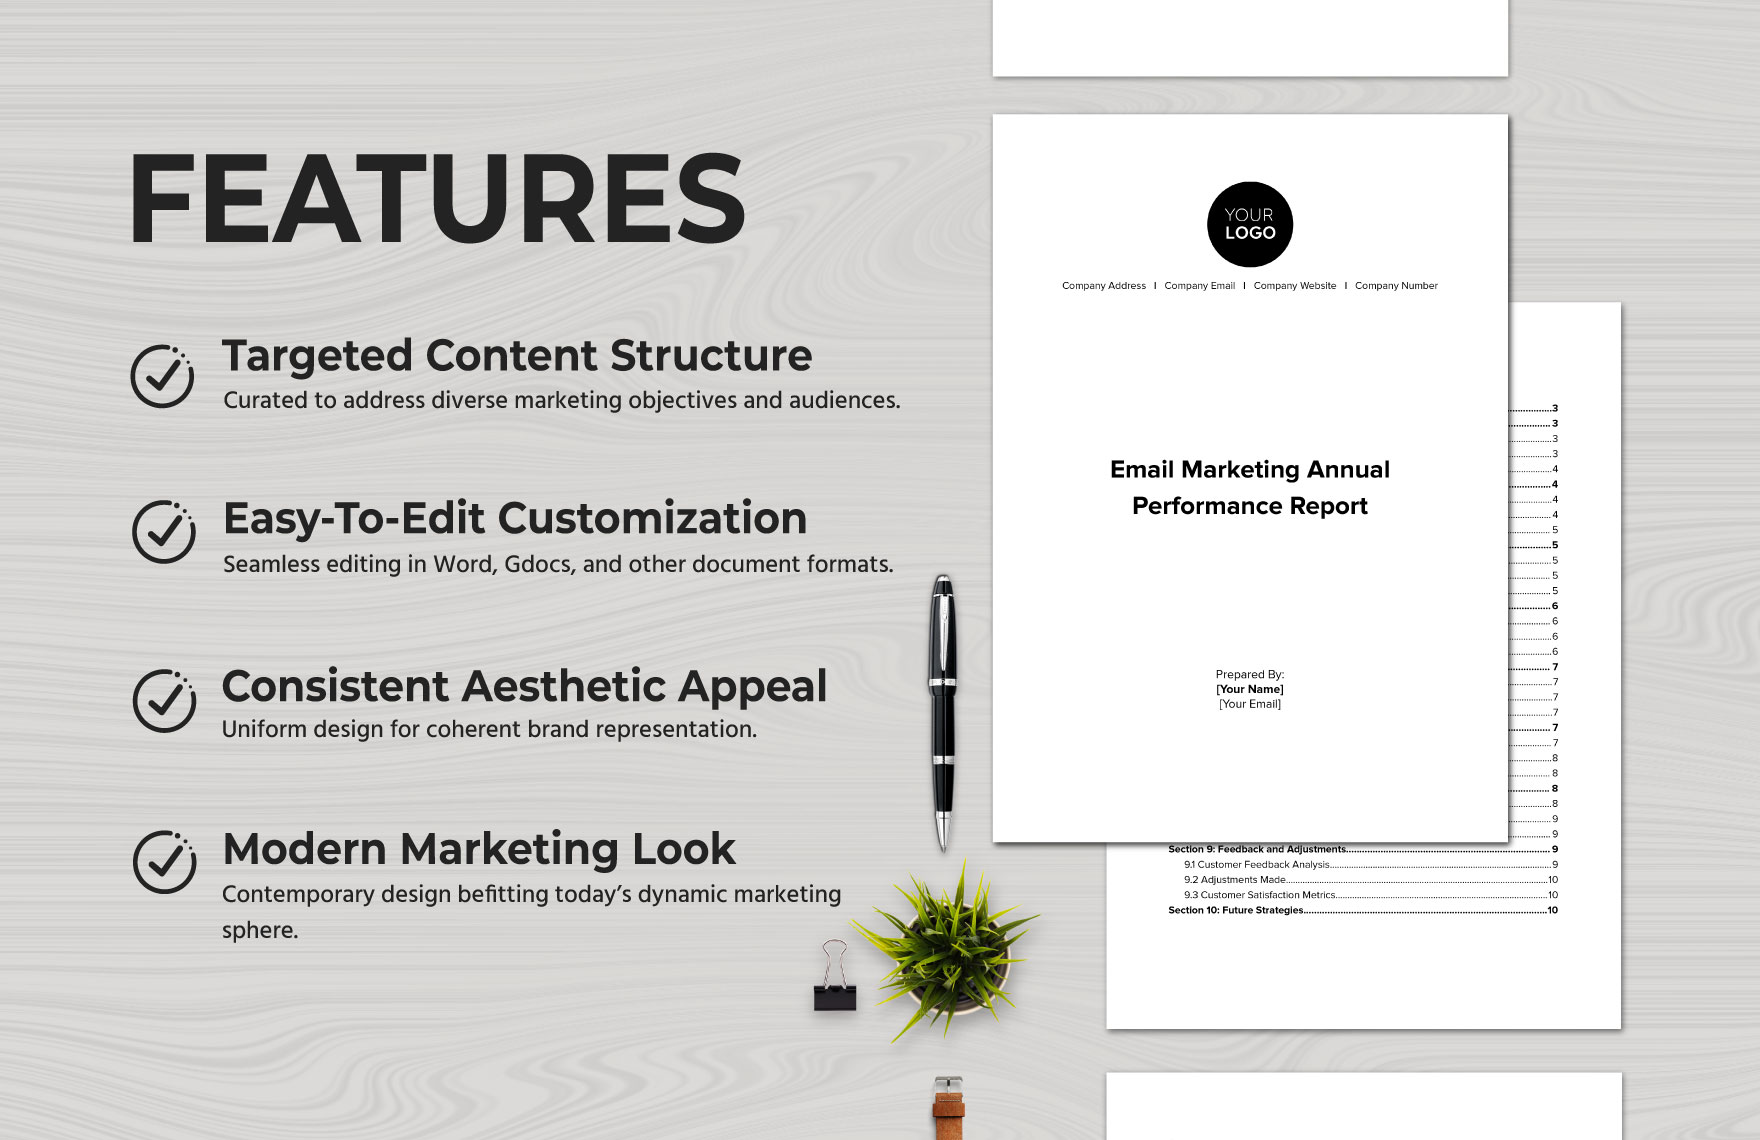 Email Marketing Annual Performance Report Template